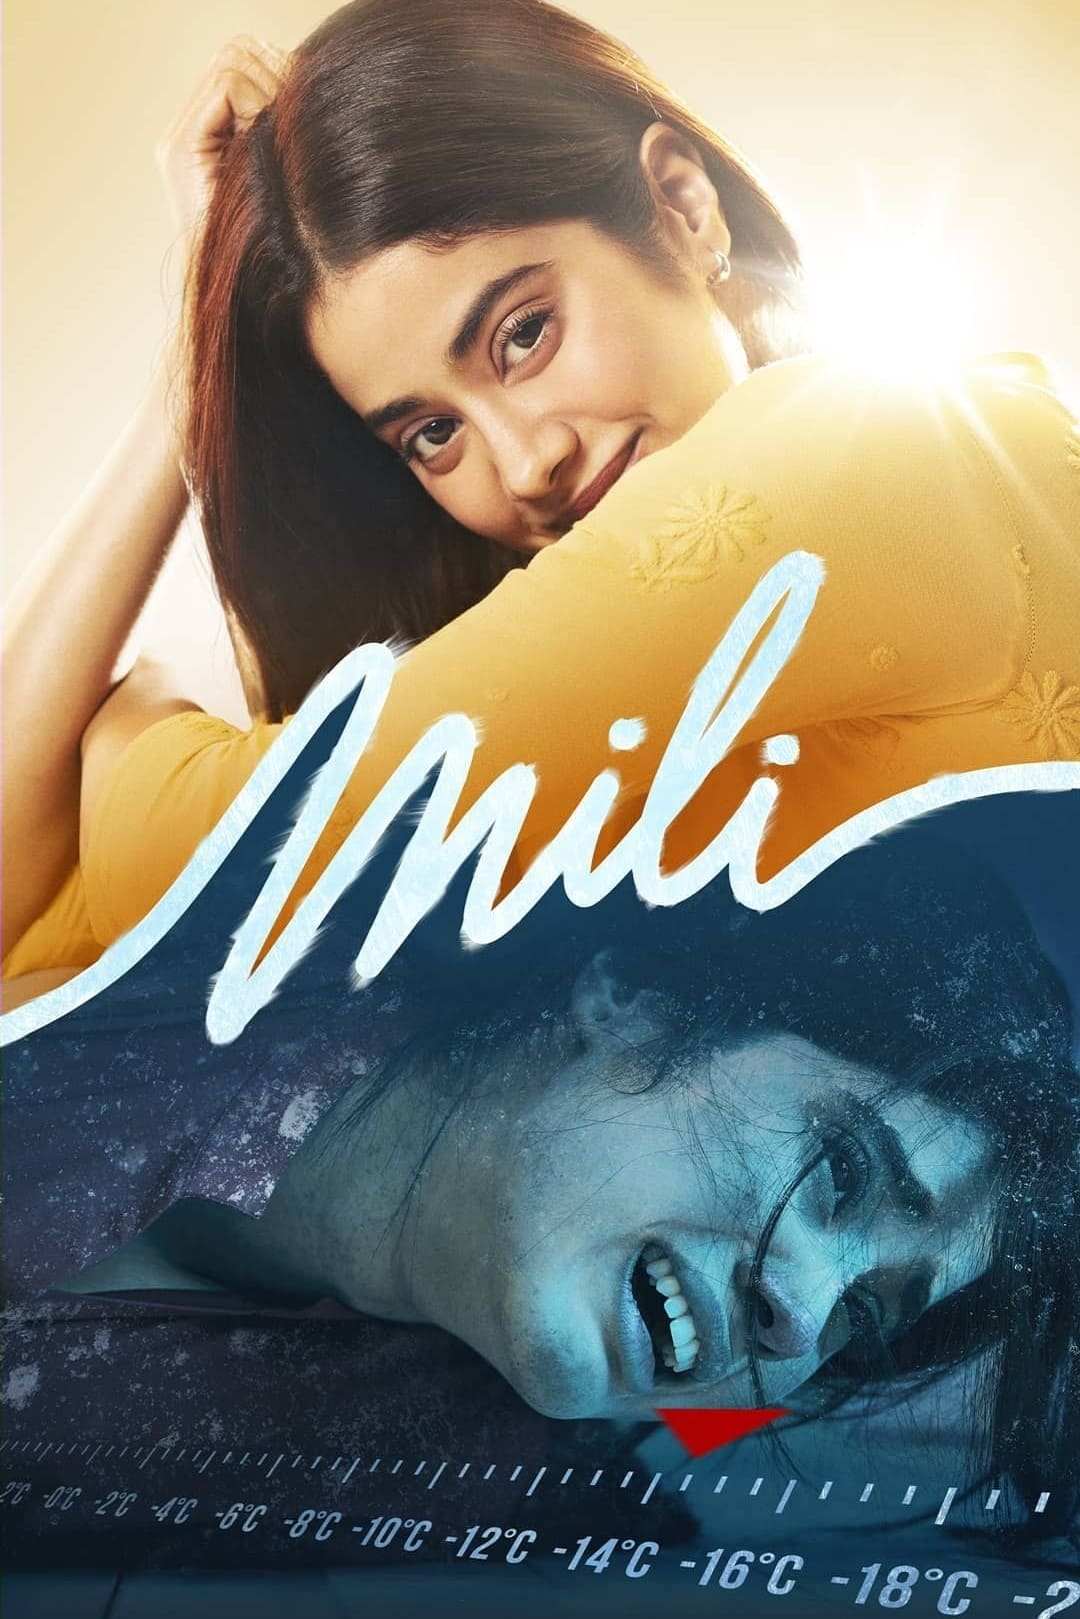 Poster for the movie "Mili"